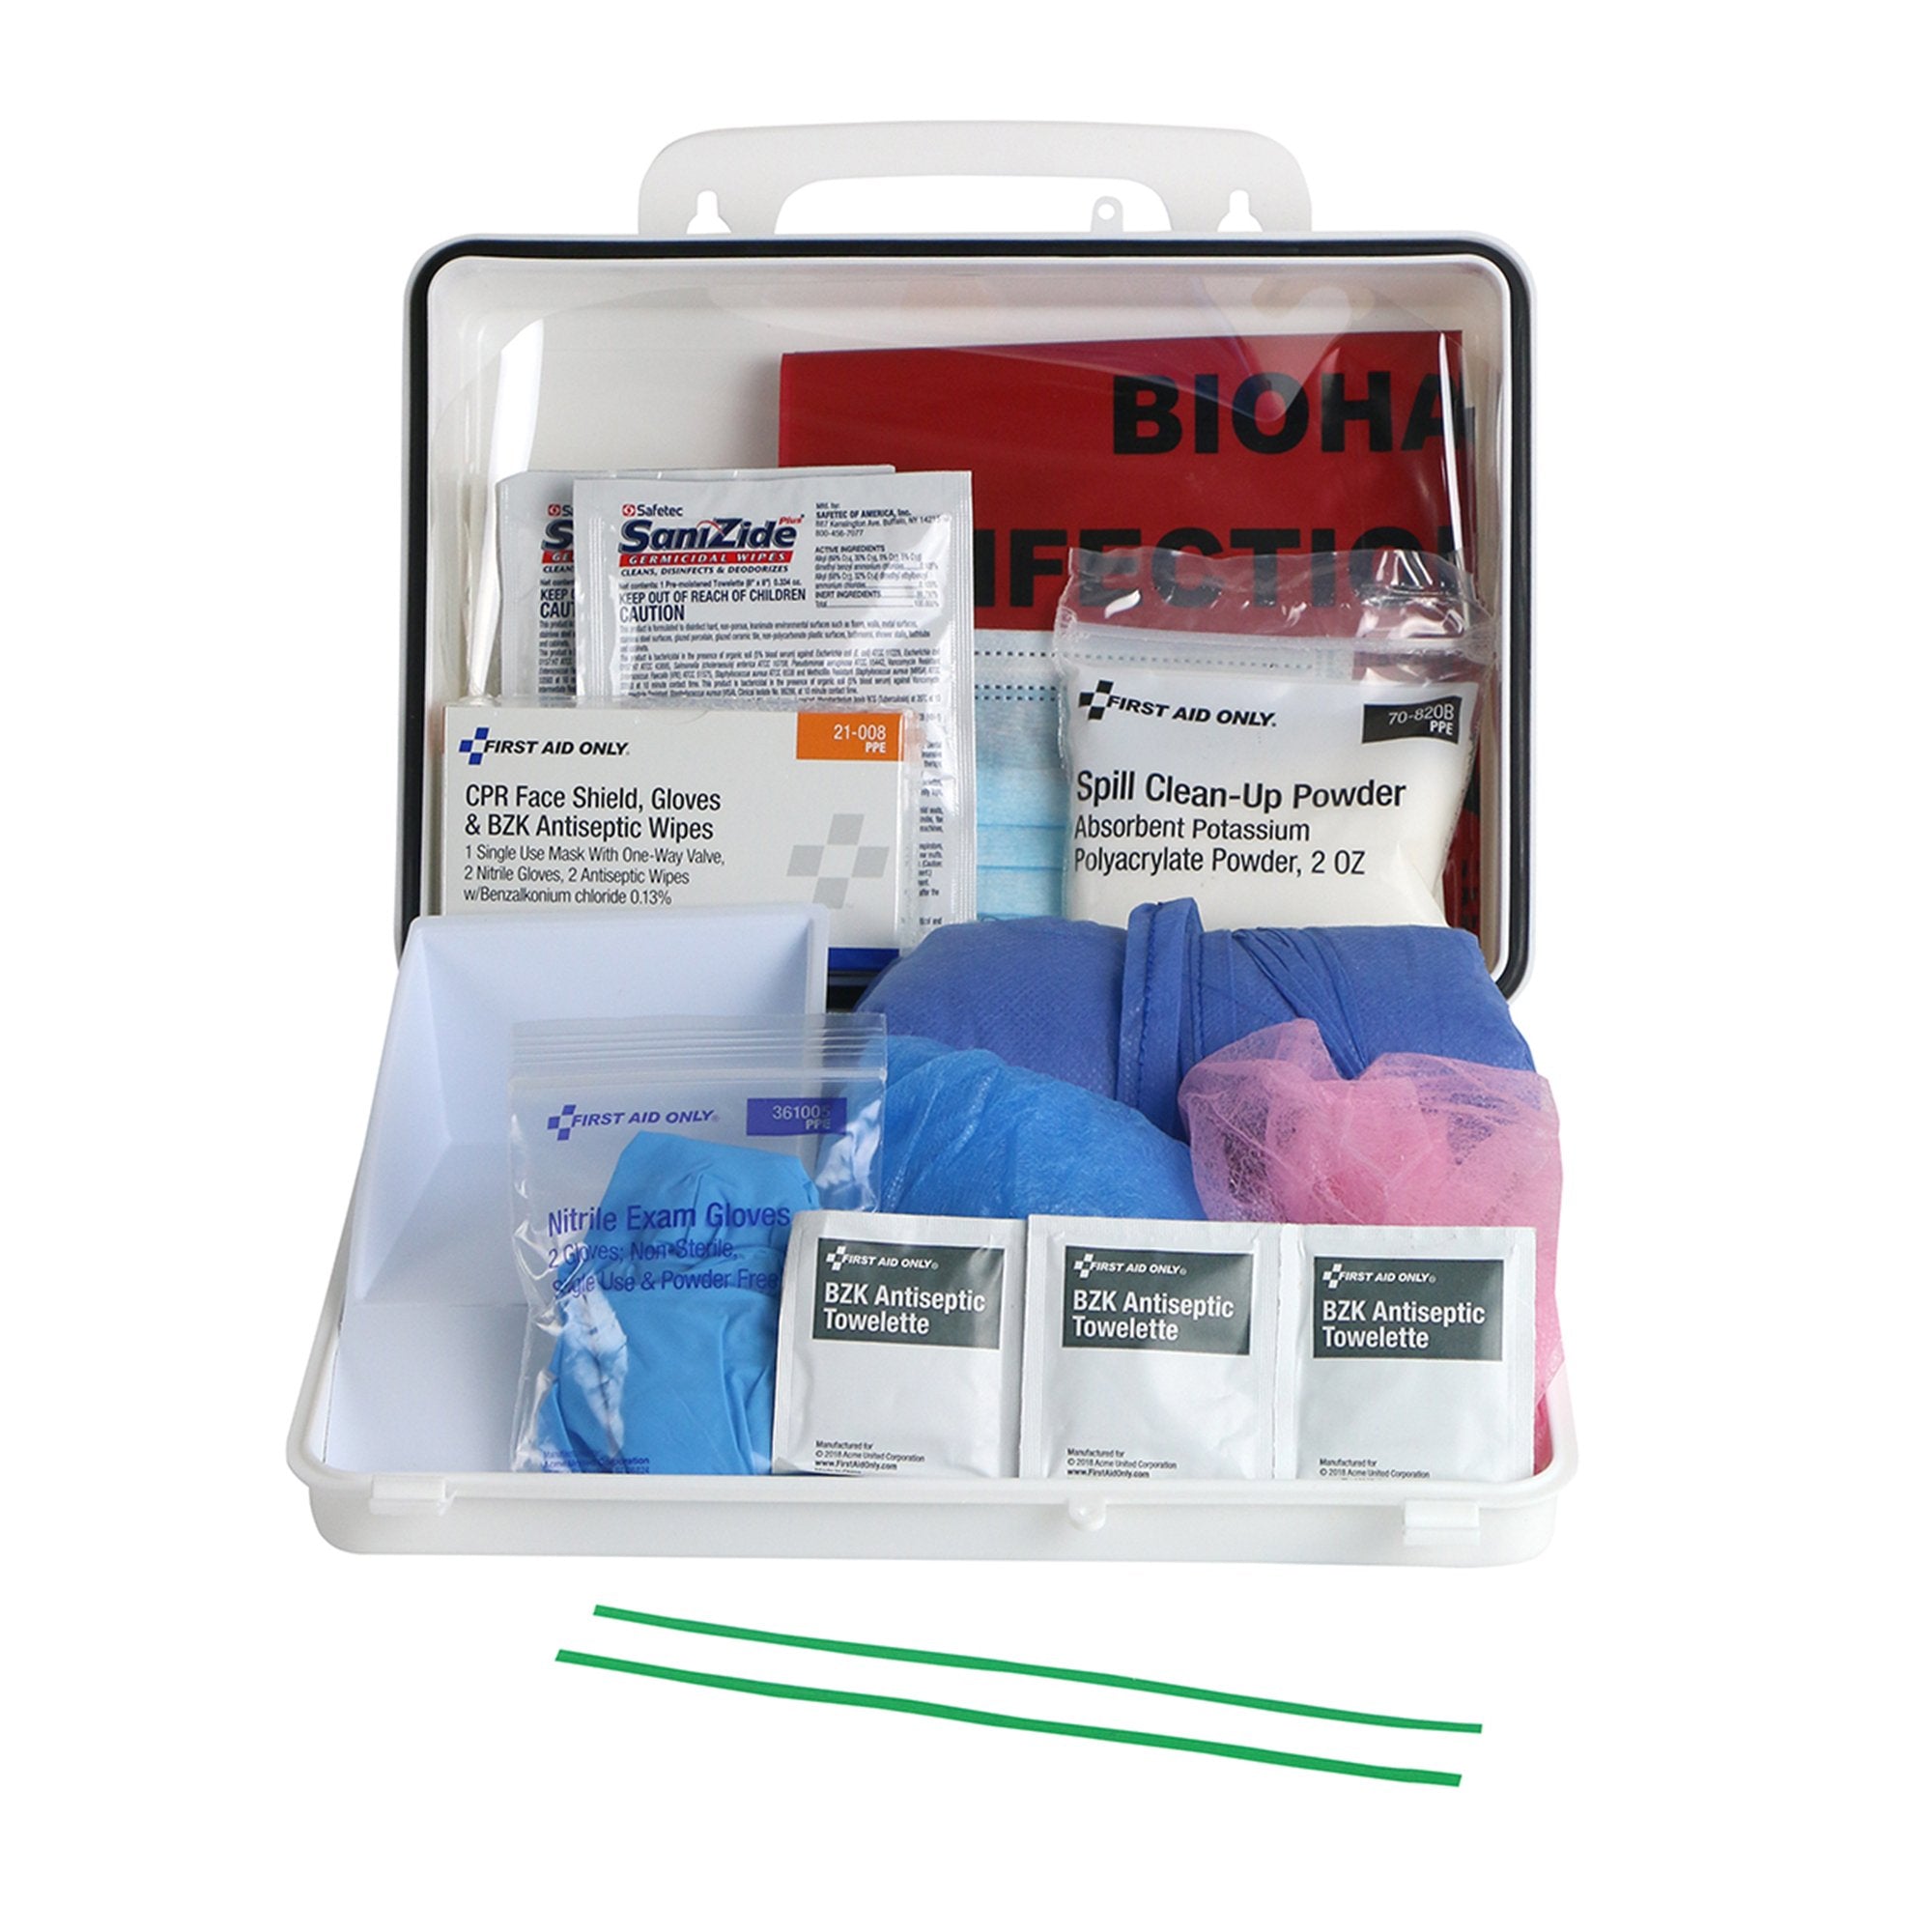 Bloodborne Pathogen Spill Clean Up / Personal Protection With CPR Pack Kit First Aid Only